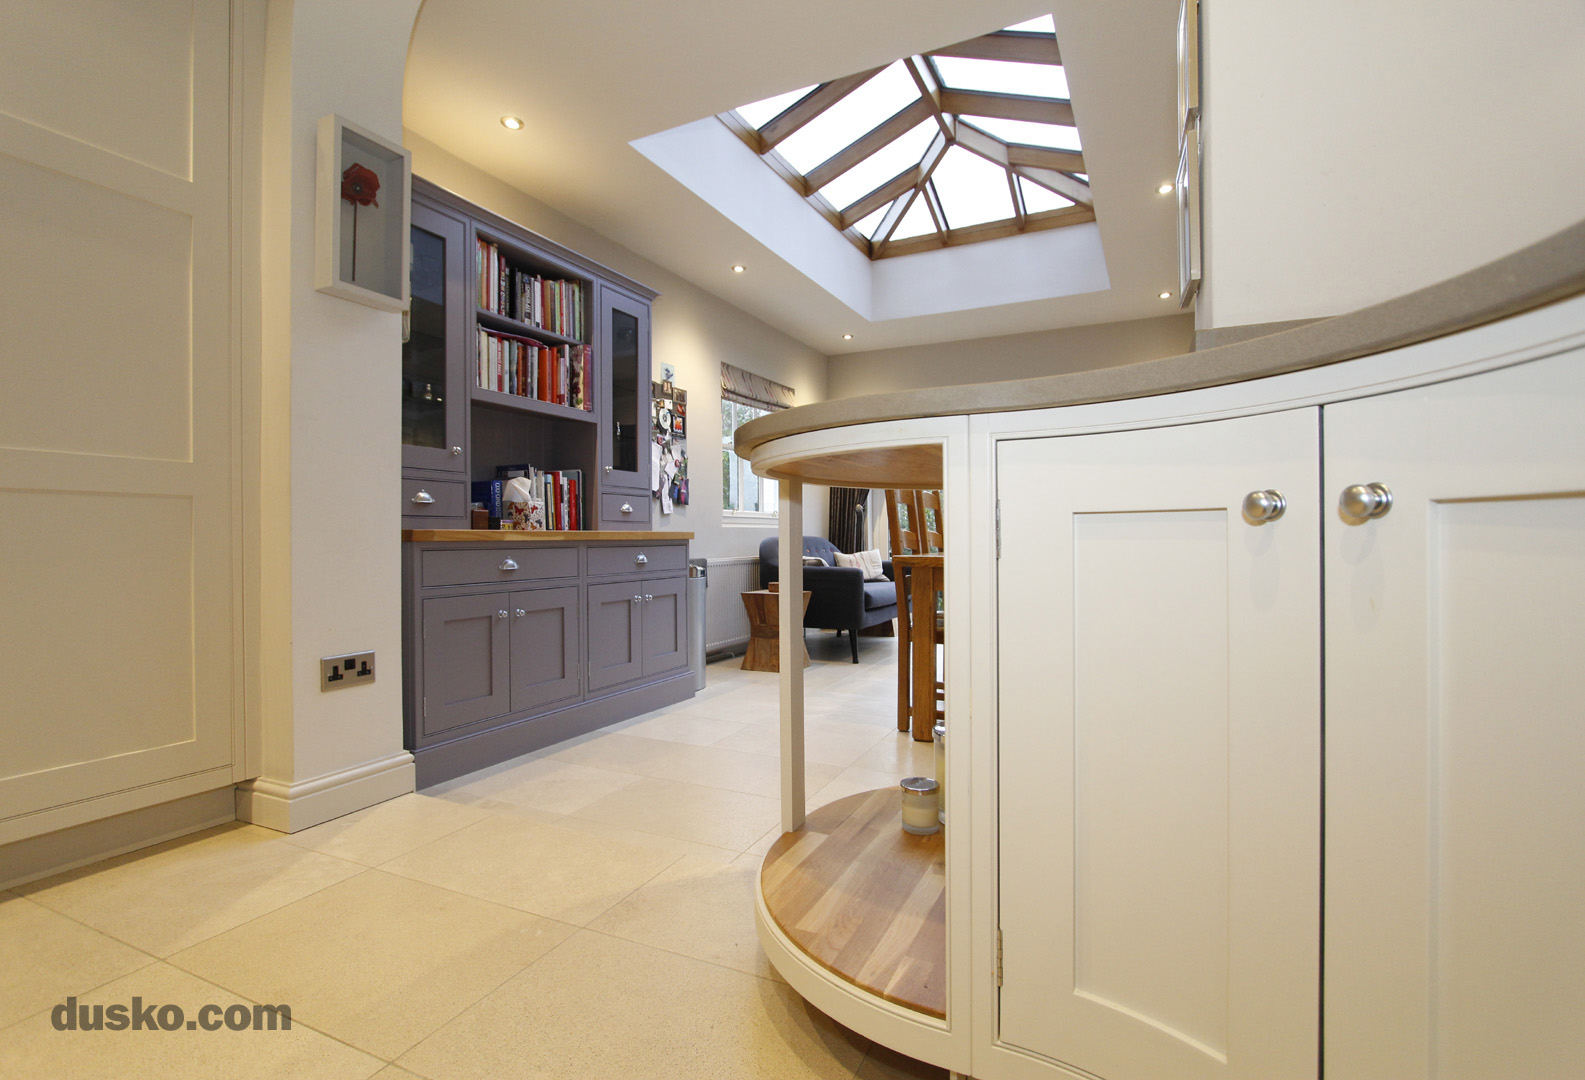 In Frame Kitchen in Bowdon, Cheshire Kitchen Dining Area